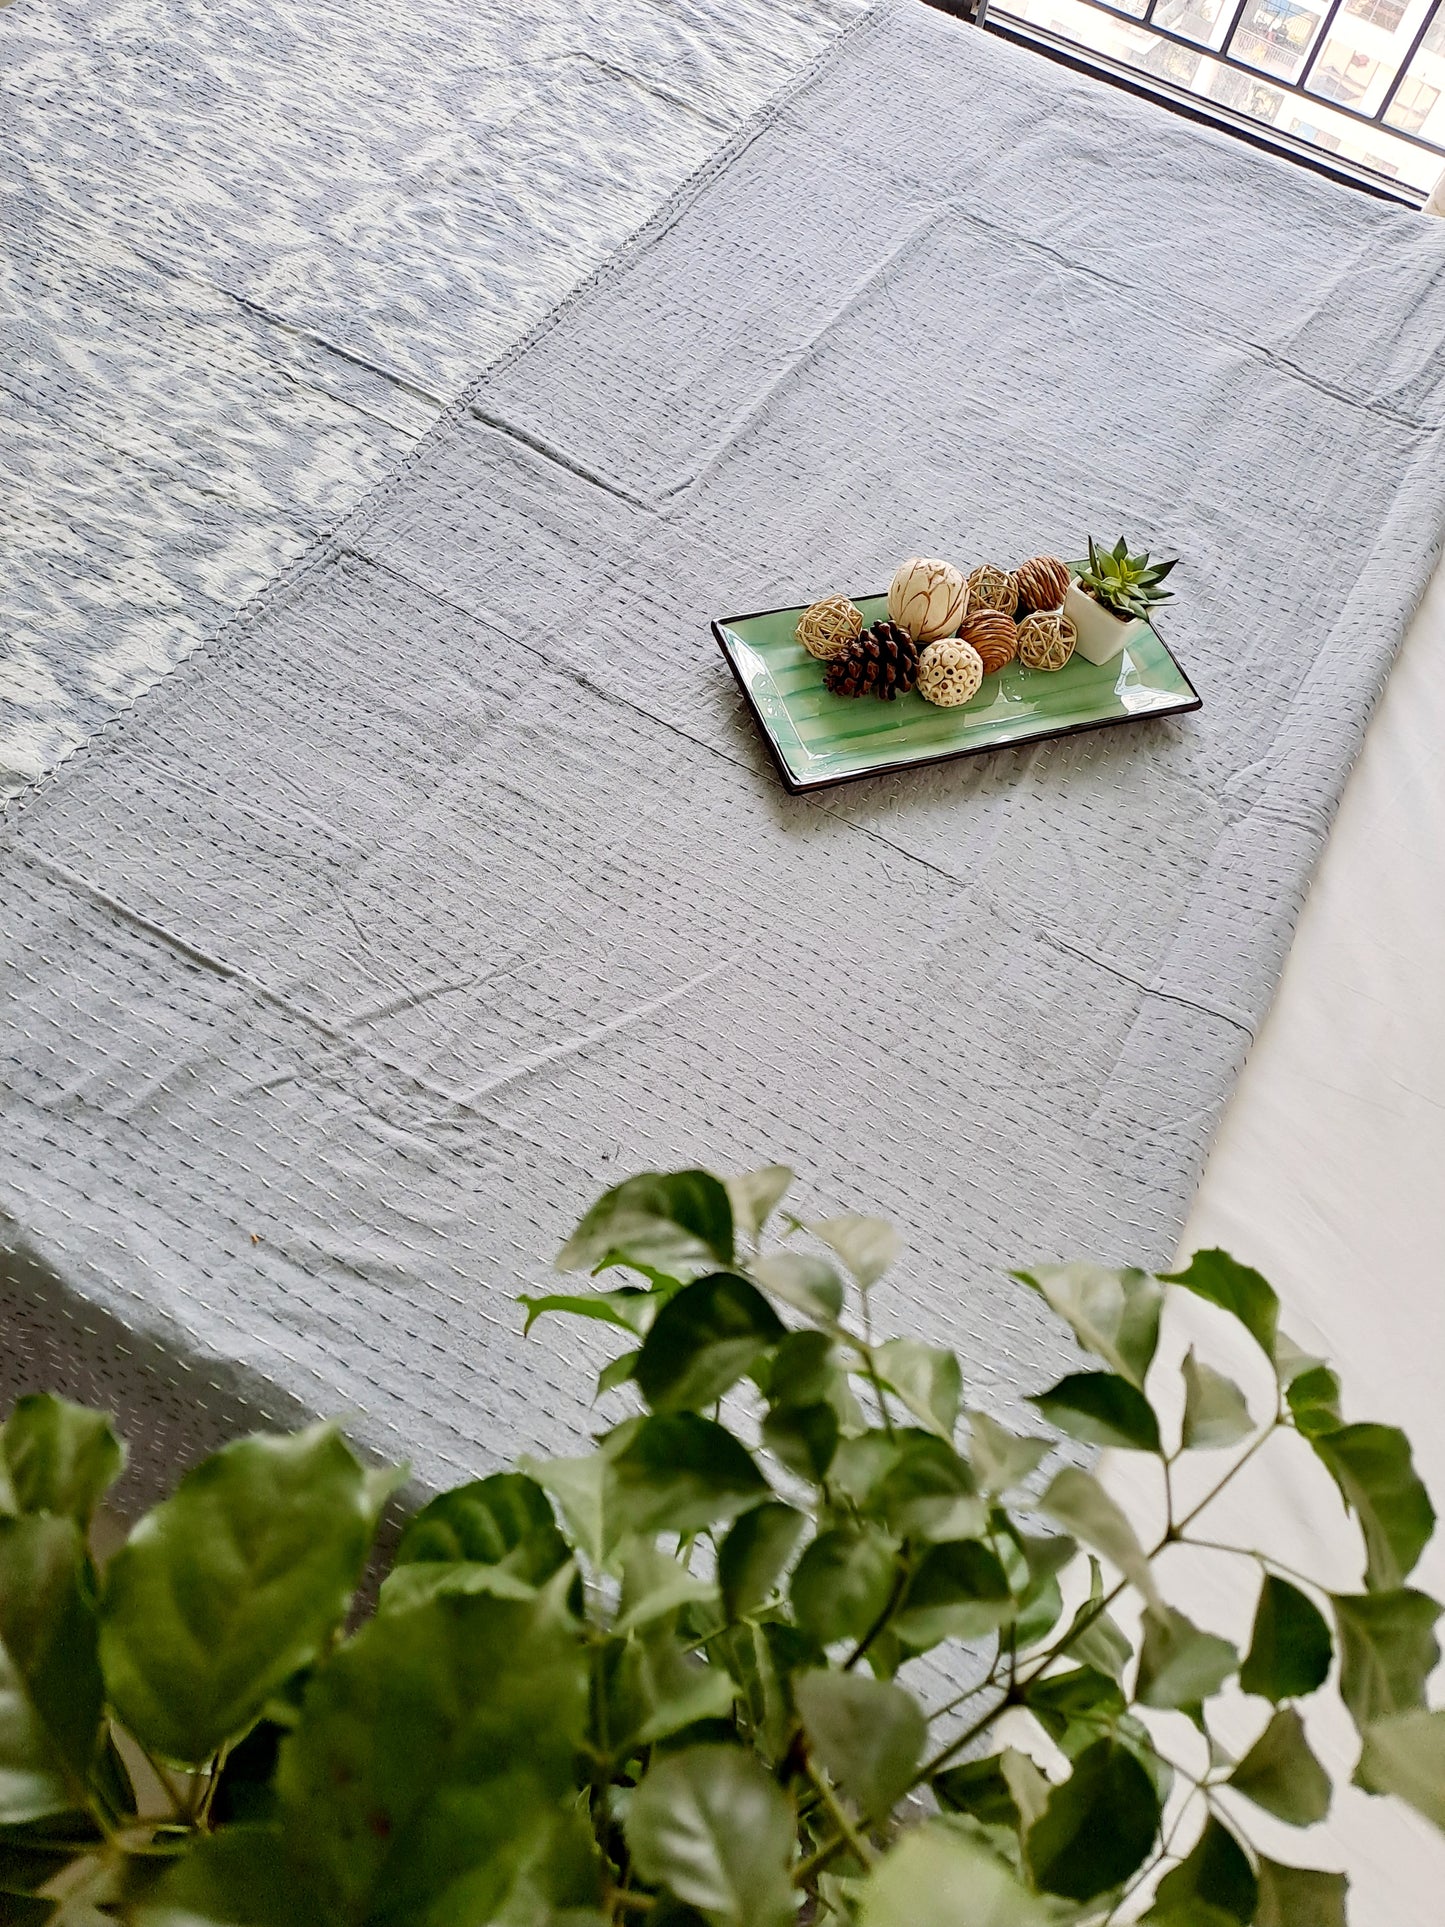 GREY KANTHA COTTON DOUBLE BED COVER